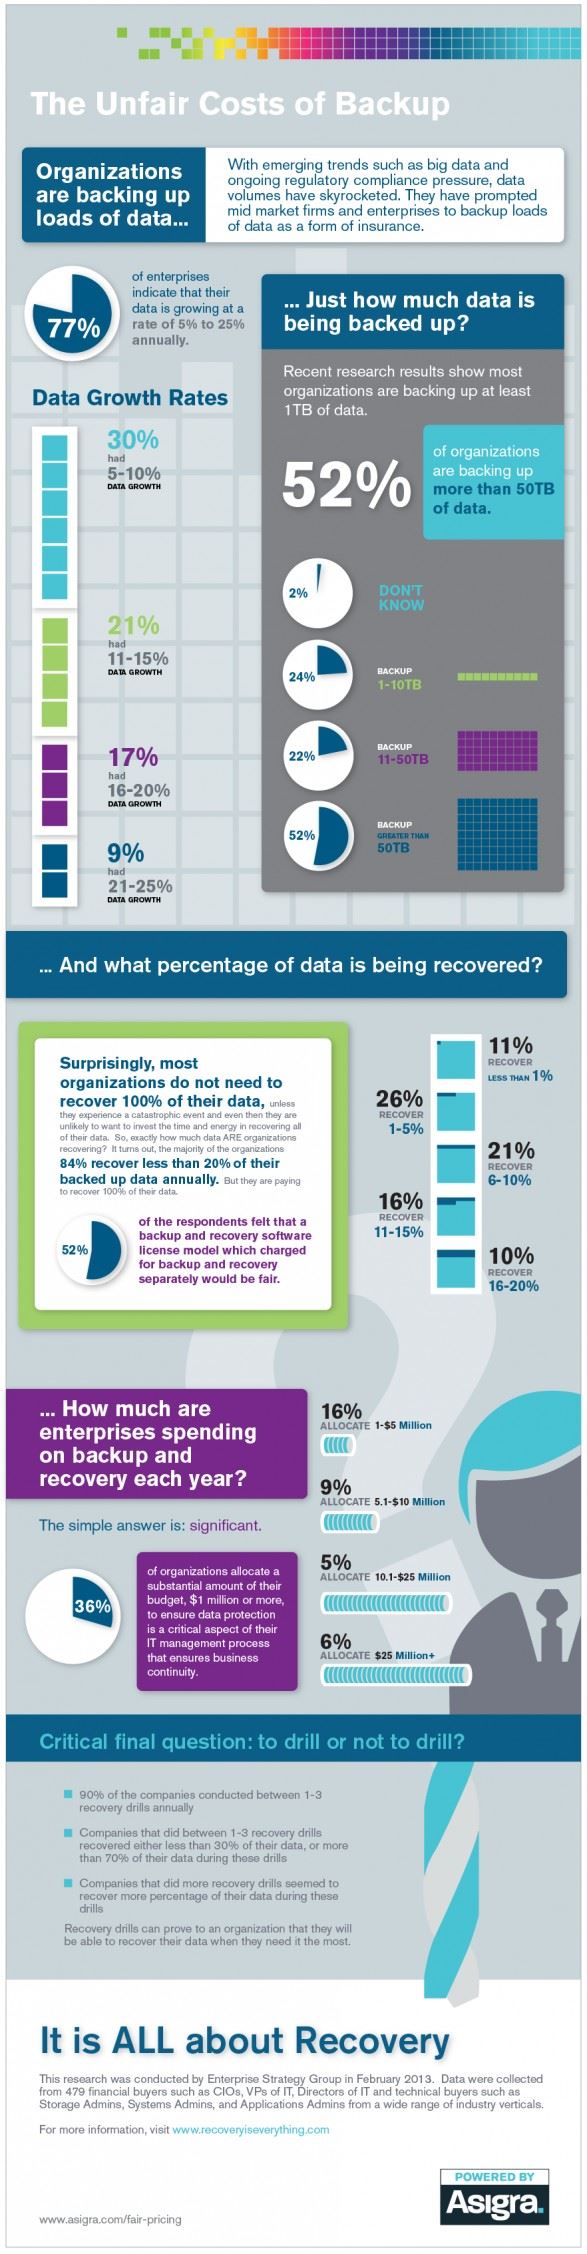 INFOGRAPHIC: The Data Backup Costs Behind Big Data